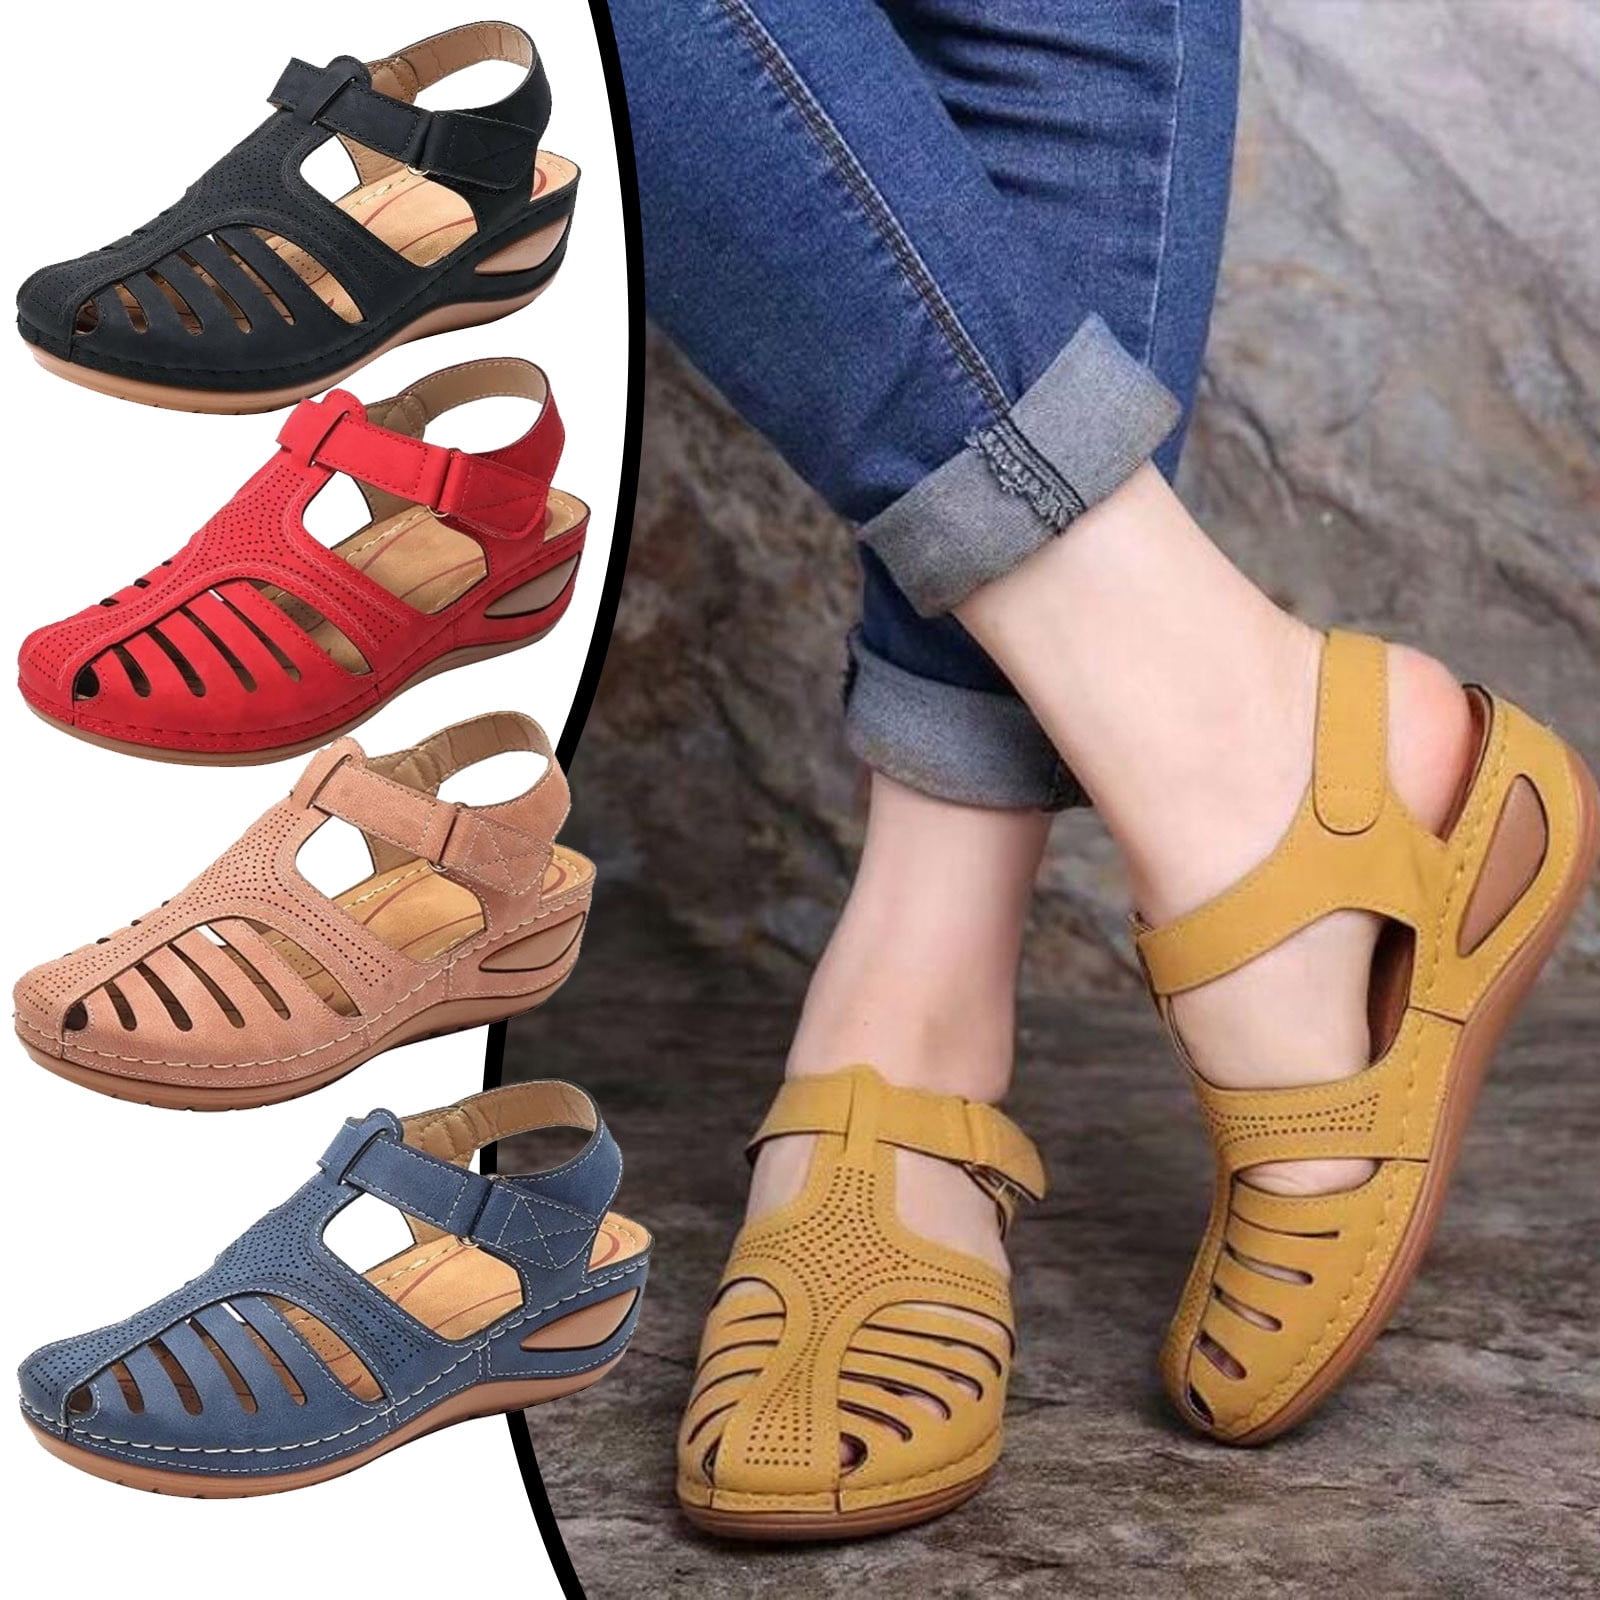 New Supersoft Landry Tan E Leather Womens Shoes Comfort Sandals Sandals Flat